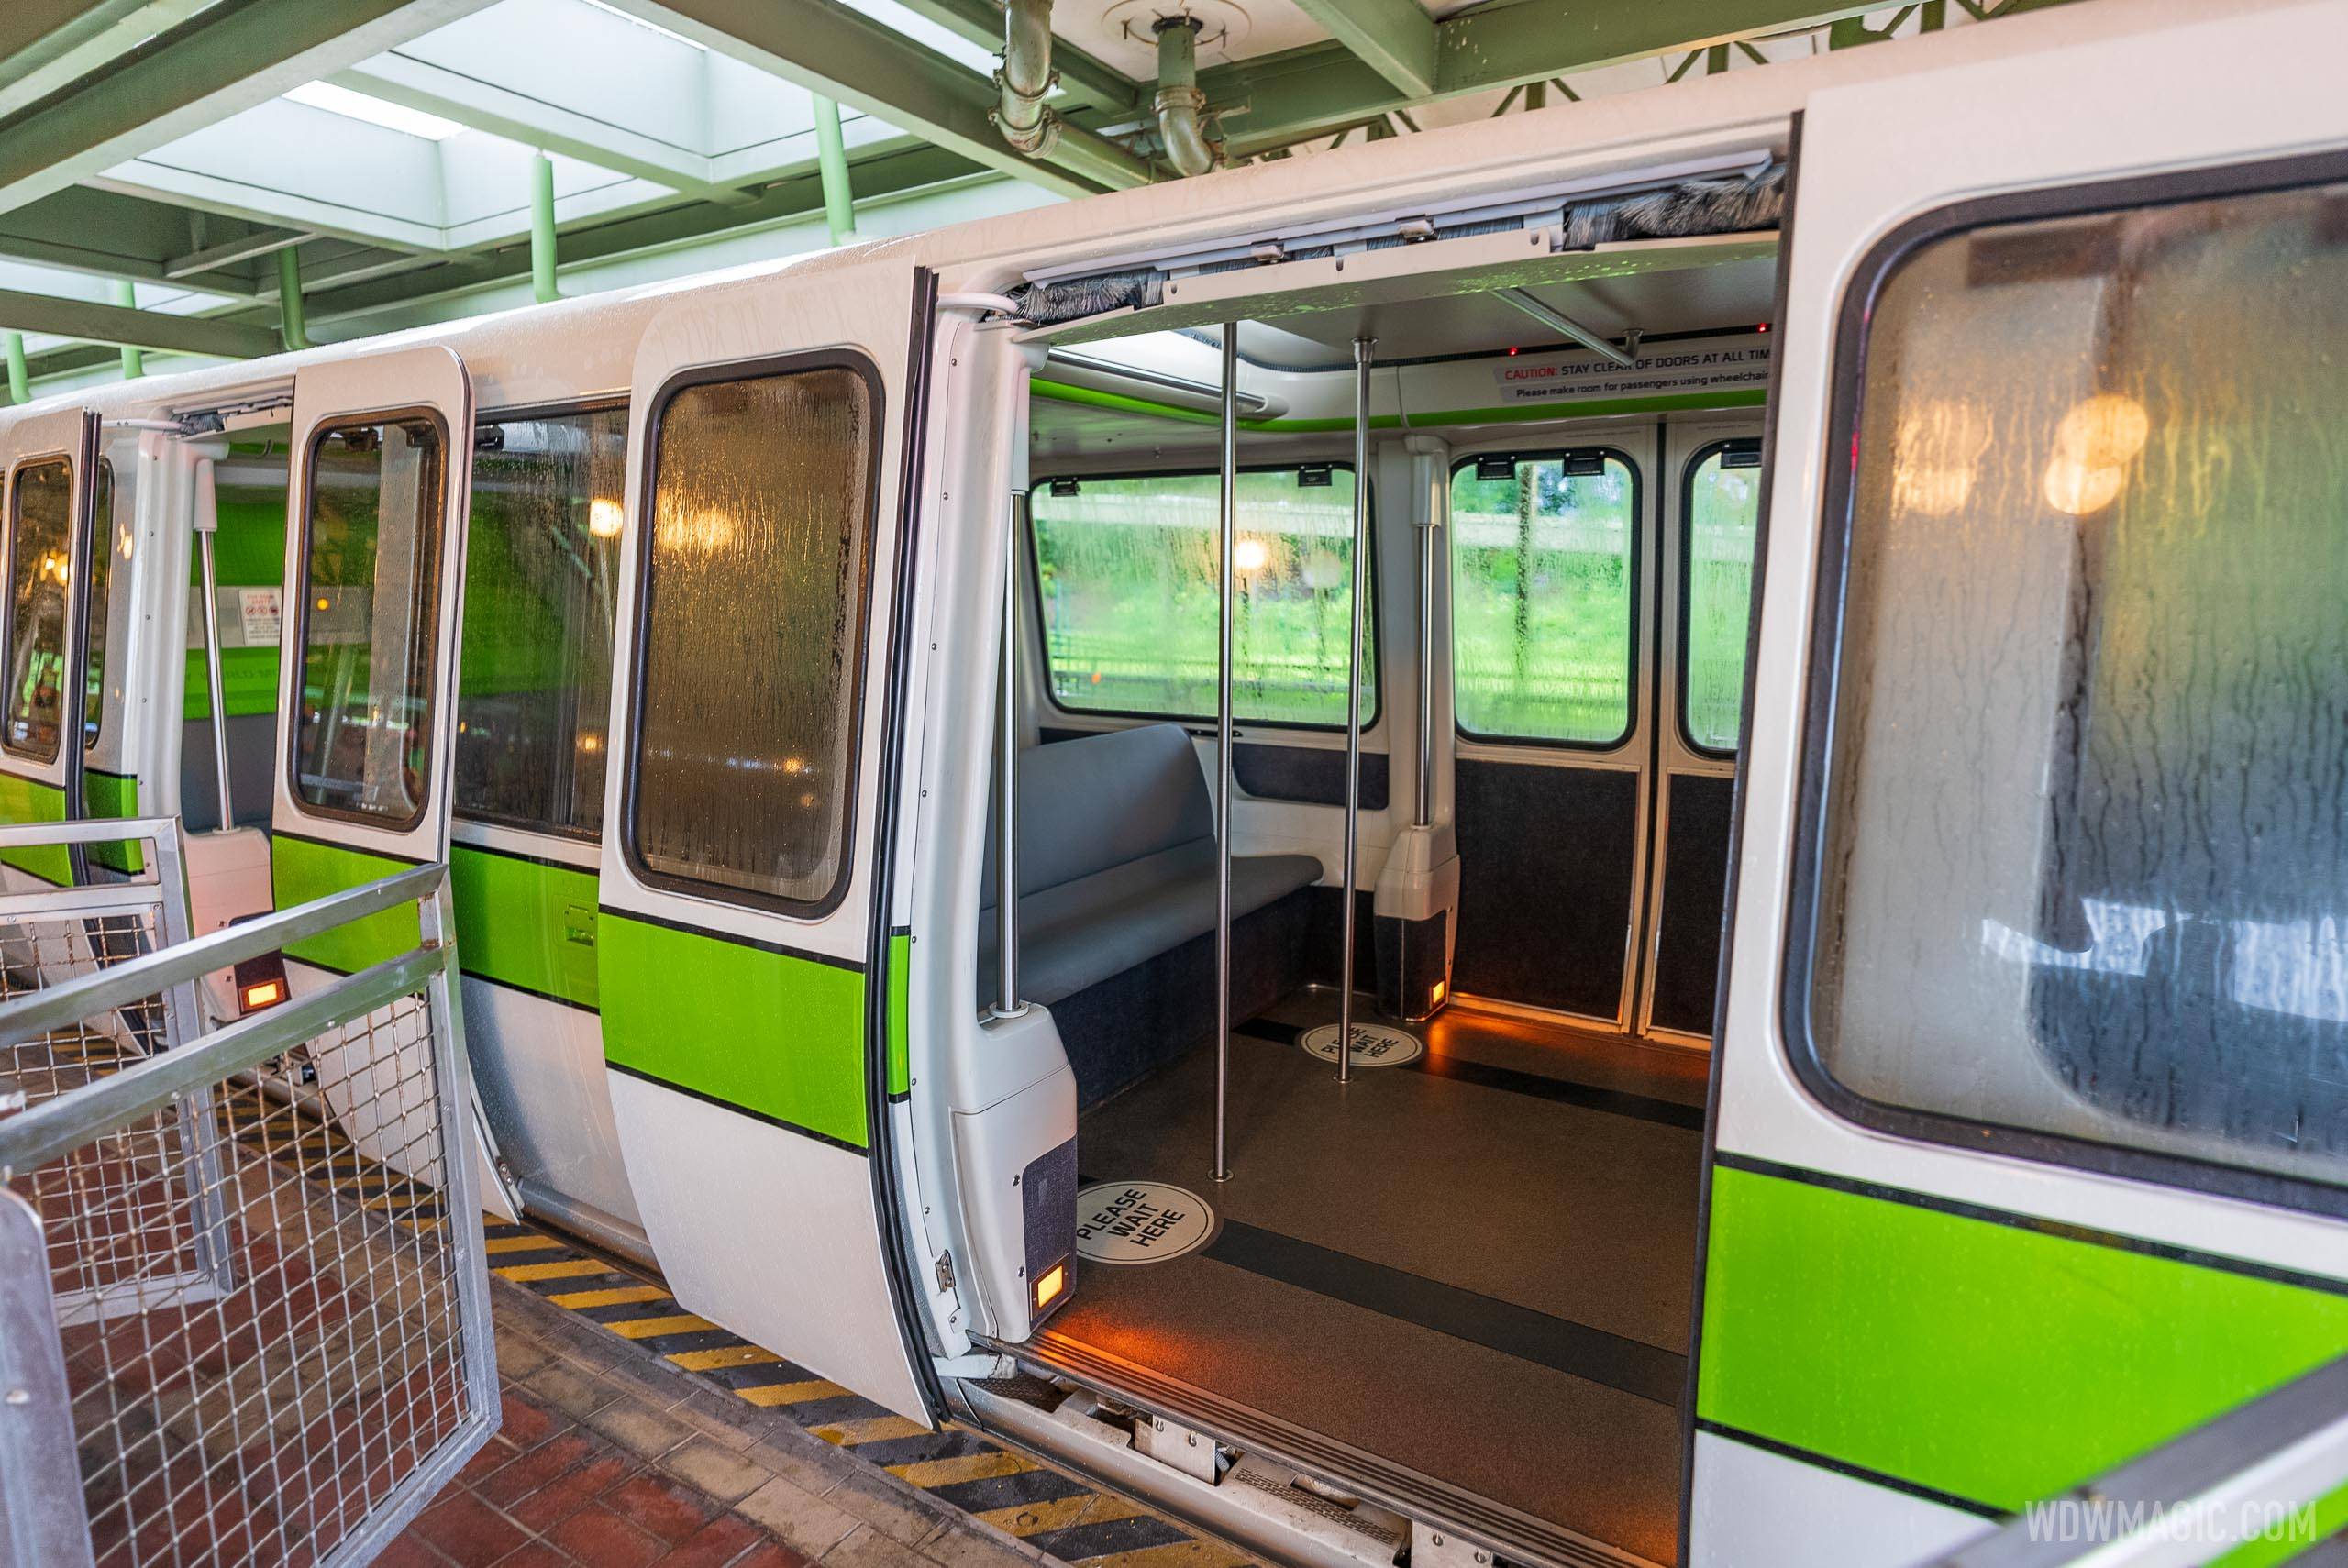 Plexiglass dividers removed from the monorails